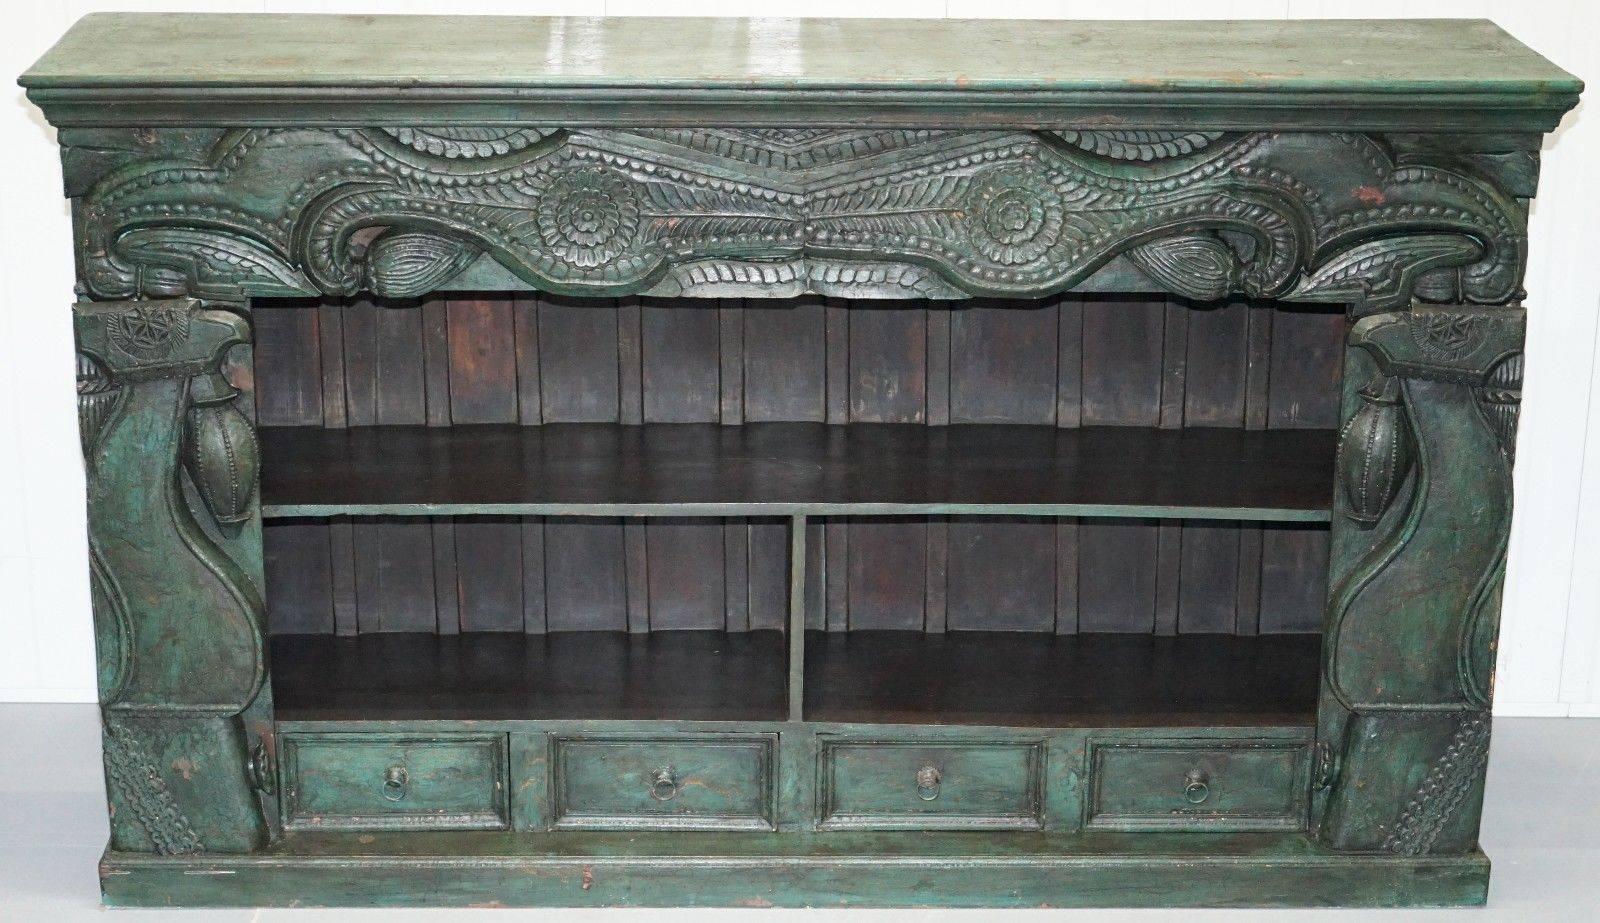 We are delighted to offer for sale this very large and heavy solid teak hand-carved and painted emerald green sideboard with base drawers

This is a very substantial piece of furniture, it must weigh close to 200kgs, the paint is distressed but